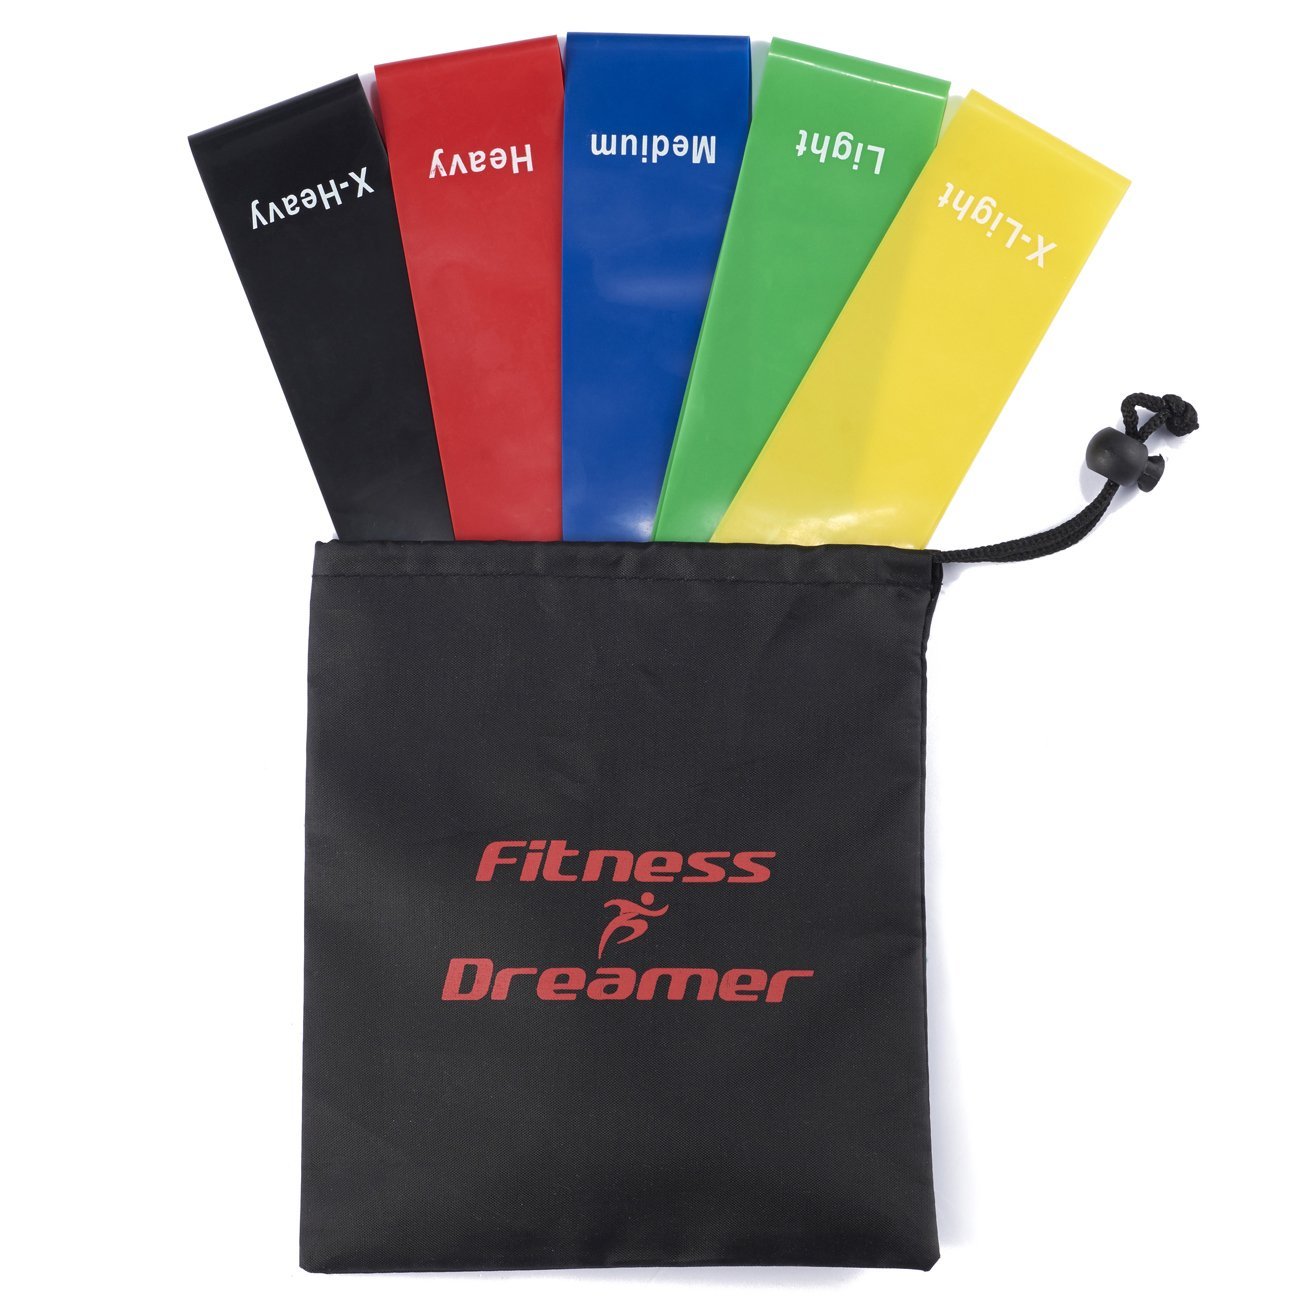 Fitness Dreamer Resistance Bands, Exercise Loop bands and Workout Bands by Set of 5, 12-inch Fitness Bands for Training or Physical Therapy-Improve Mobility and Strength, Life Time Warranty - image 4 of 7